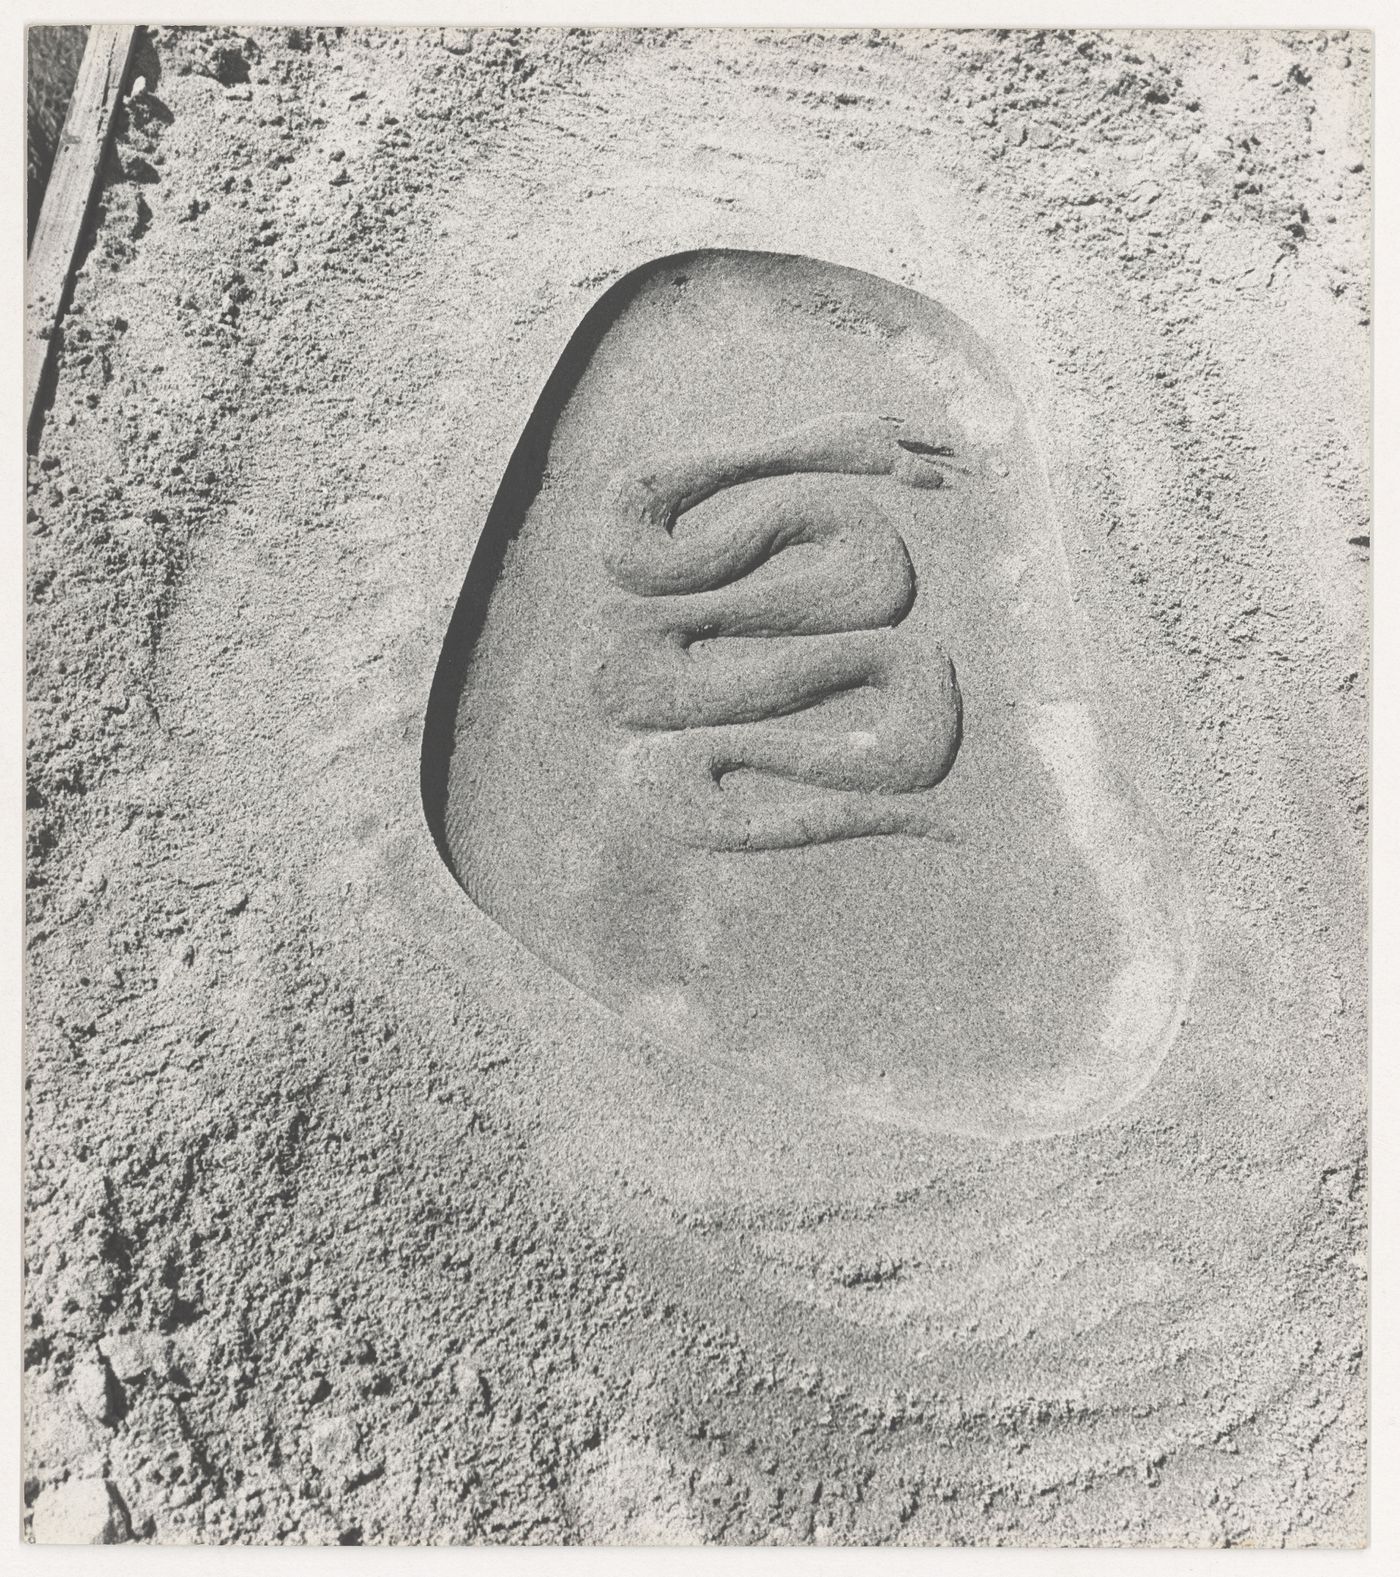 View of a bas-relief of a serpent sign by Le Corbusier, Chandigarh, India